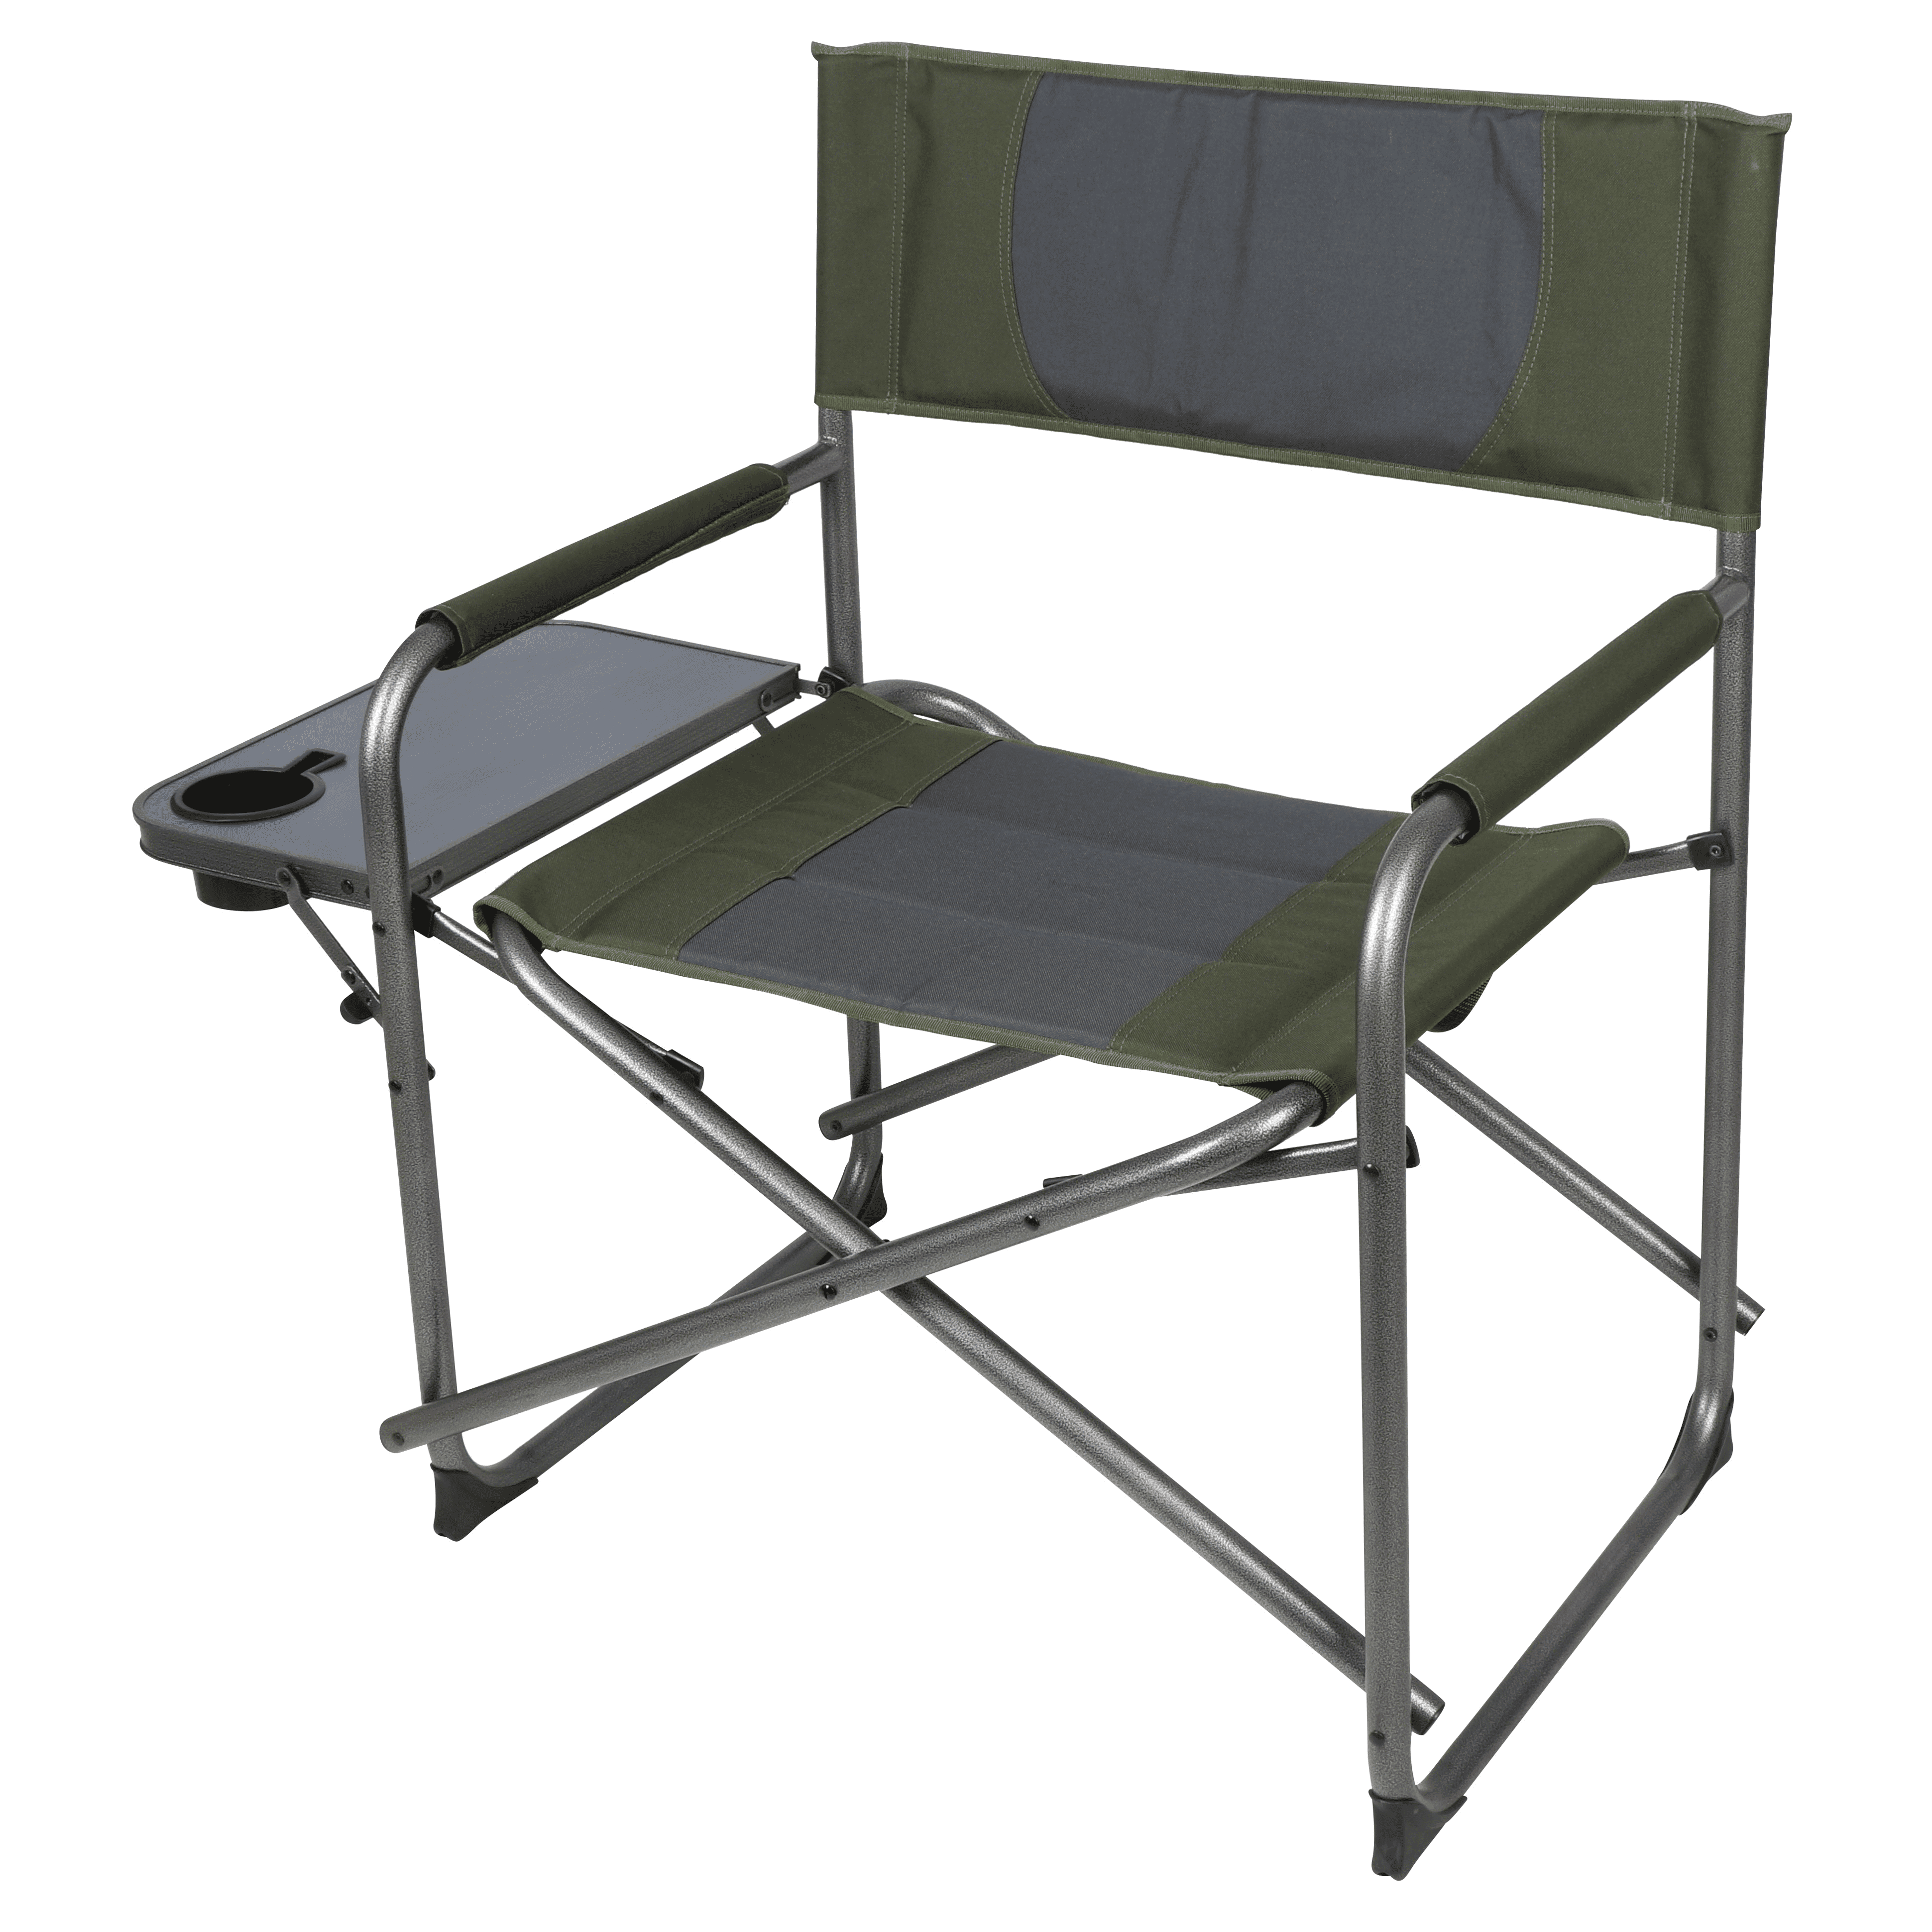 Oversized Camping Chair Lounge Big Director Tall Outdoor Folding Portable Brown 